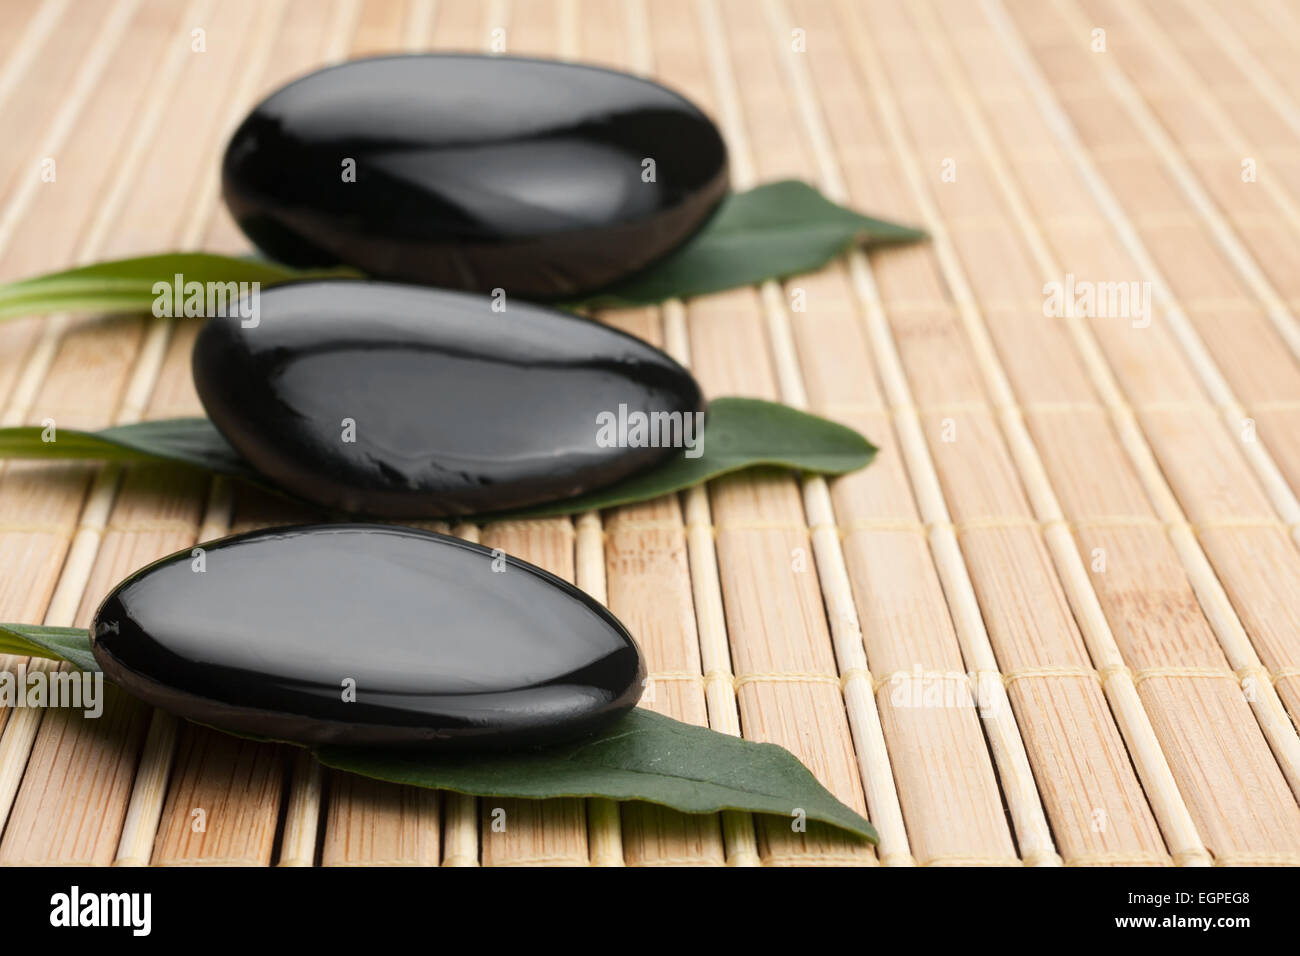 Relaxation Stones at a Spa lying on a bamboo mat Stock Photo